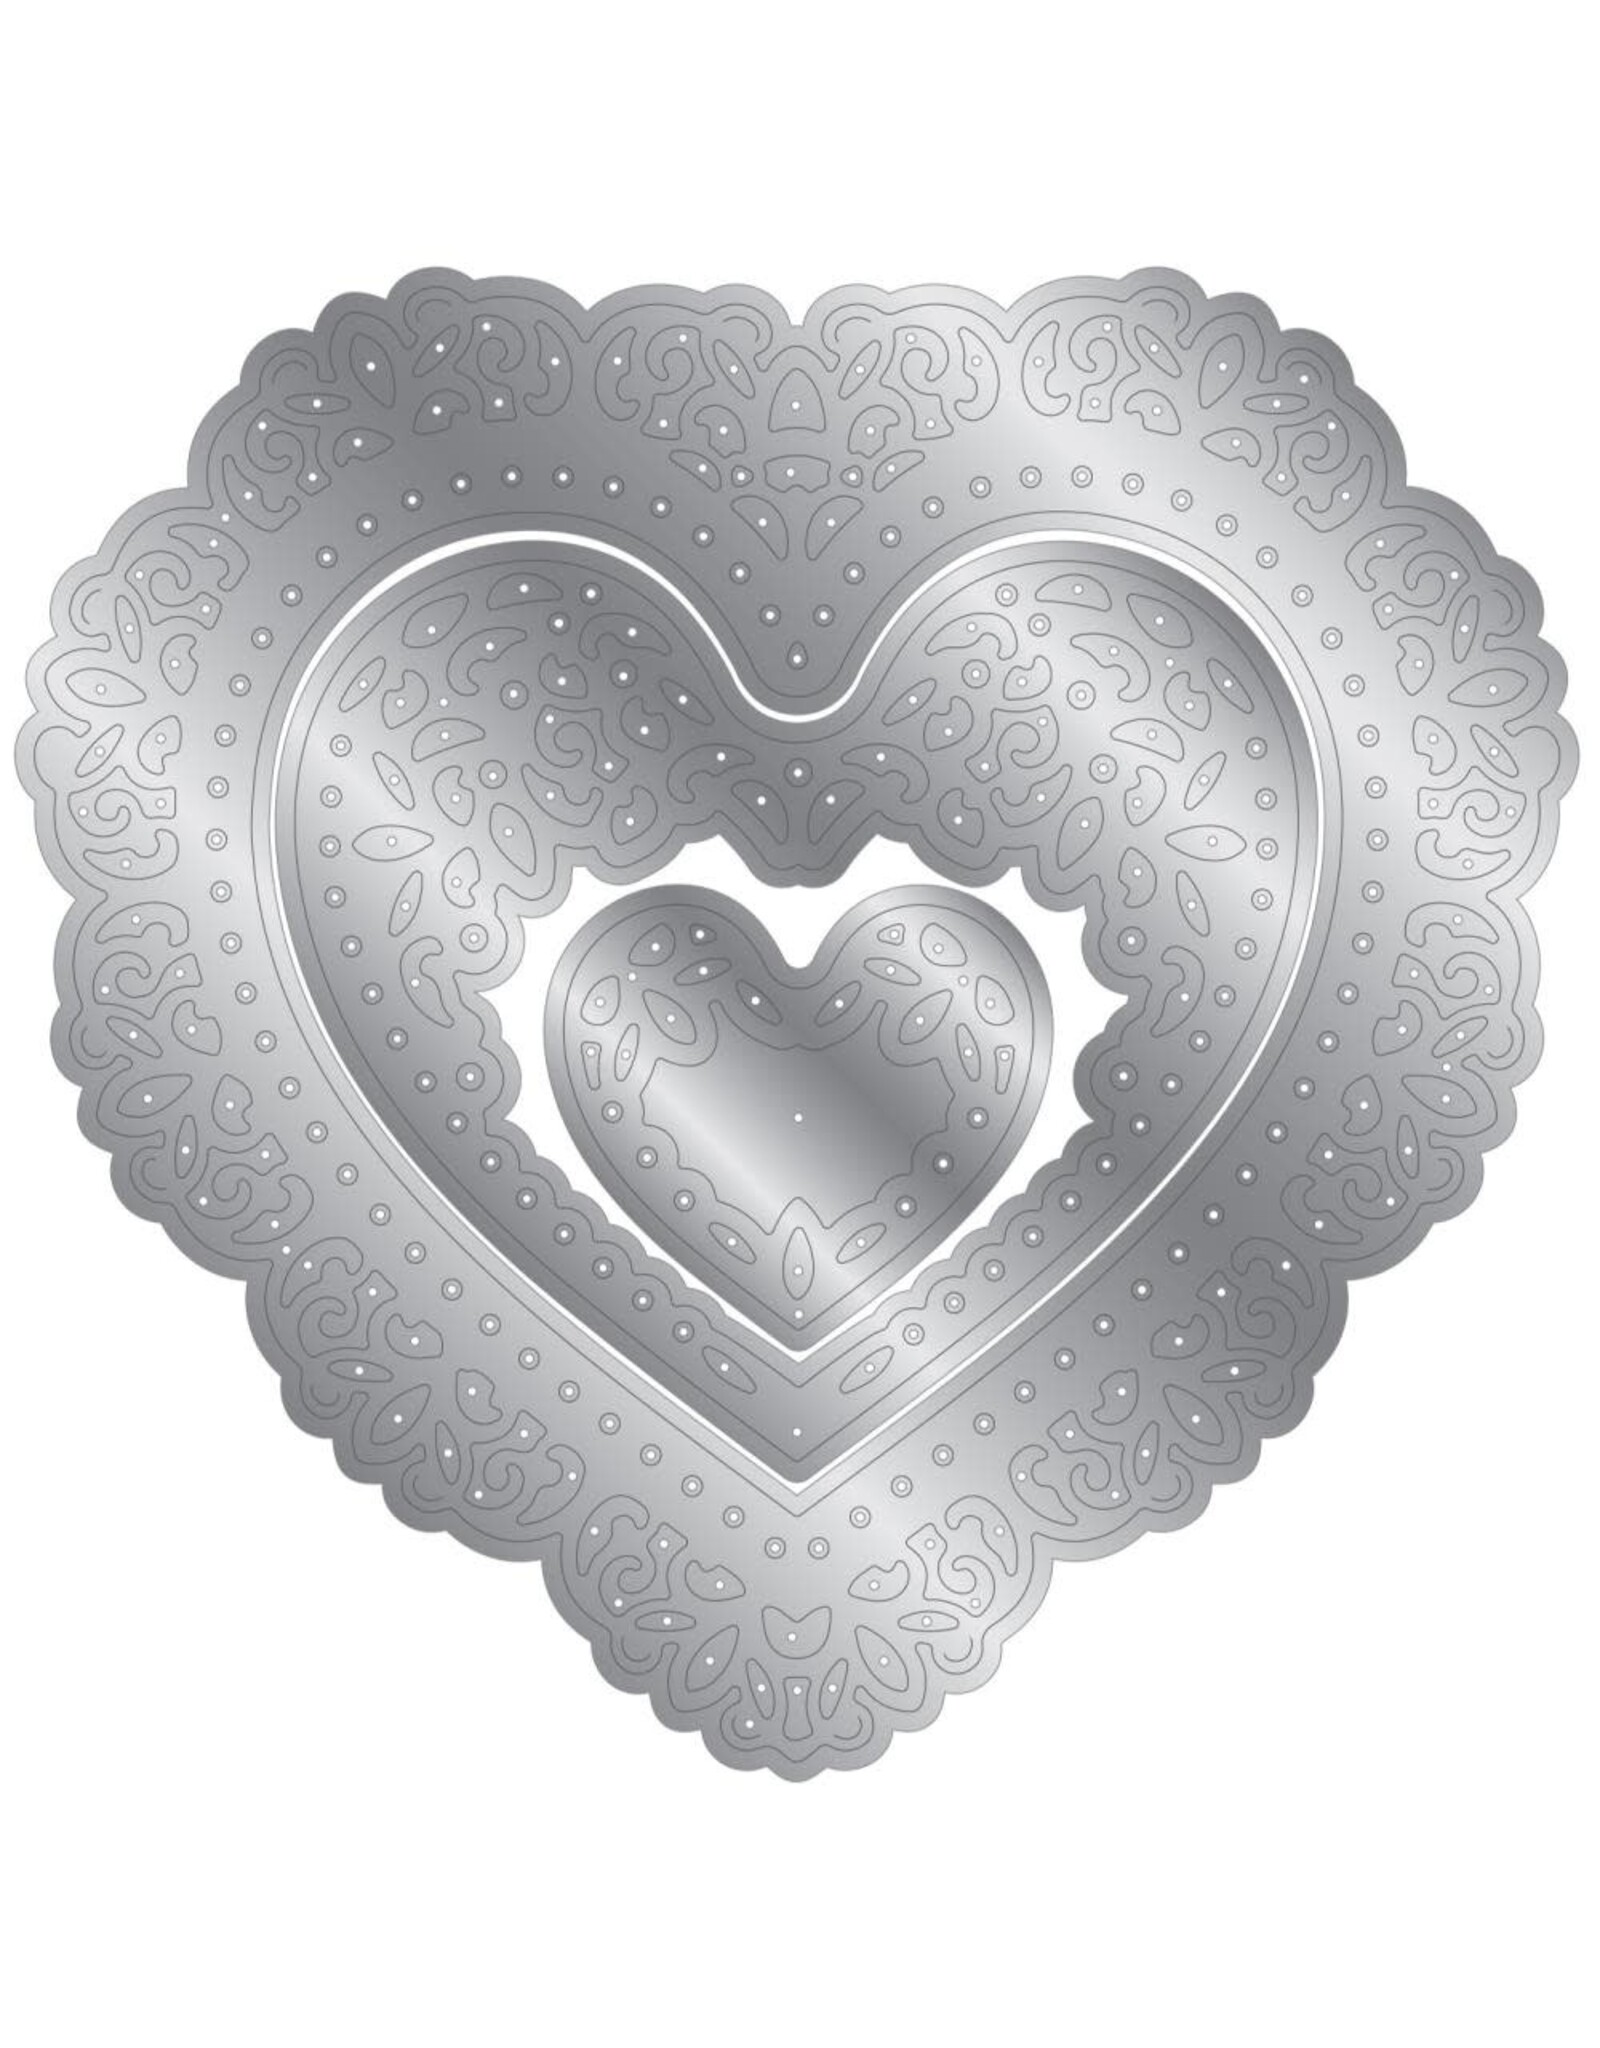 CRAFTERS COMPANION CRAFTERS COMPANION ELEMENTS SWIRLING HEART FRAMES DIE SET